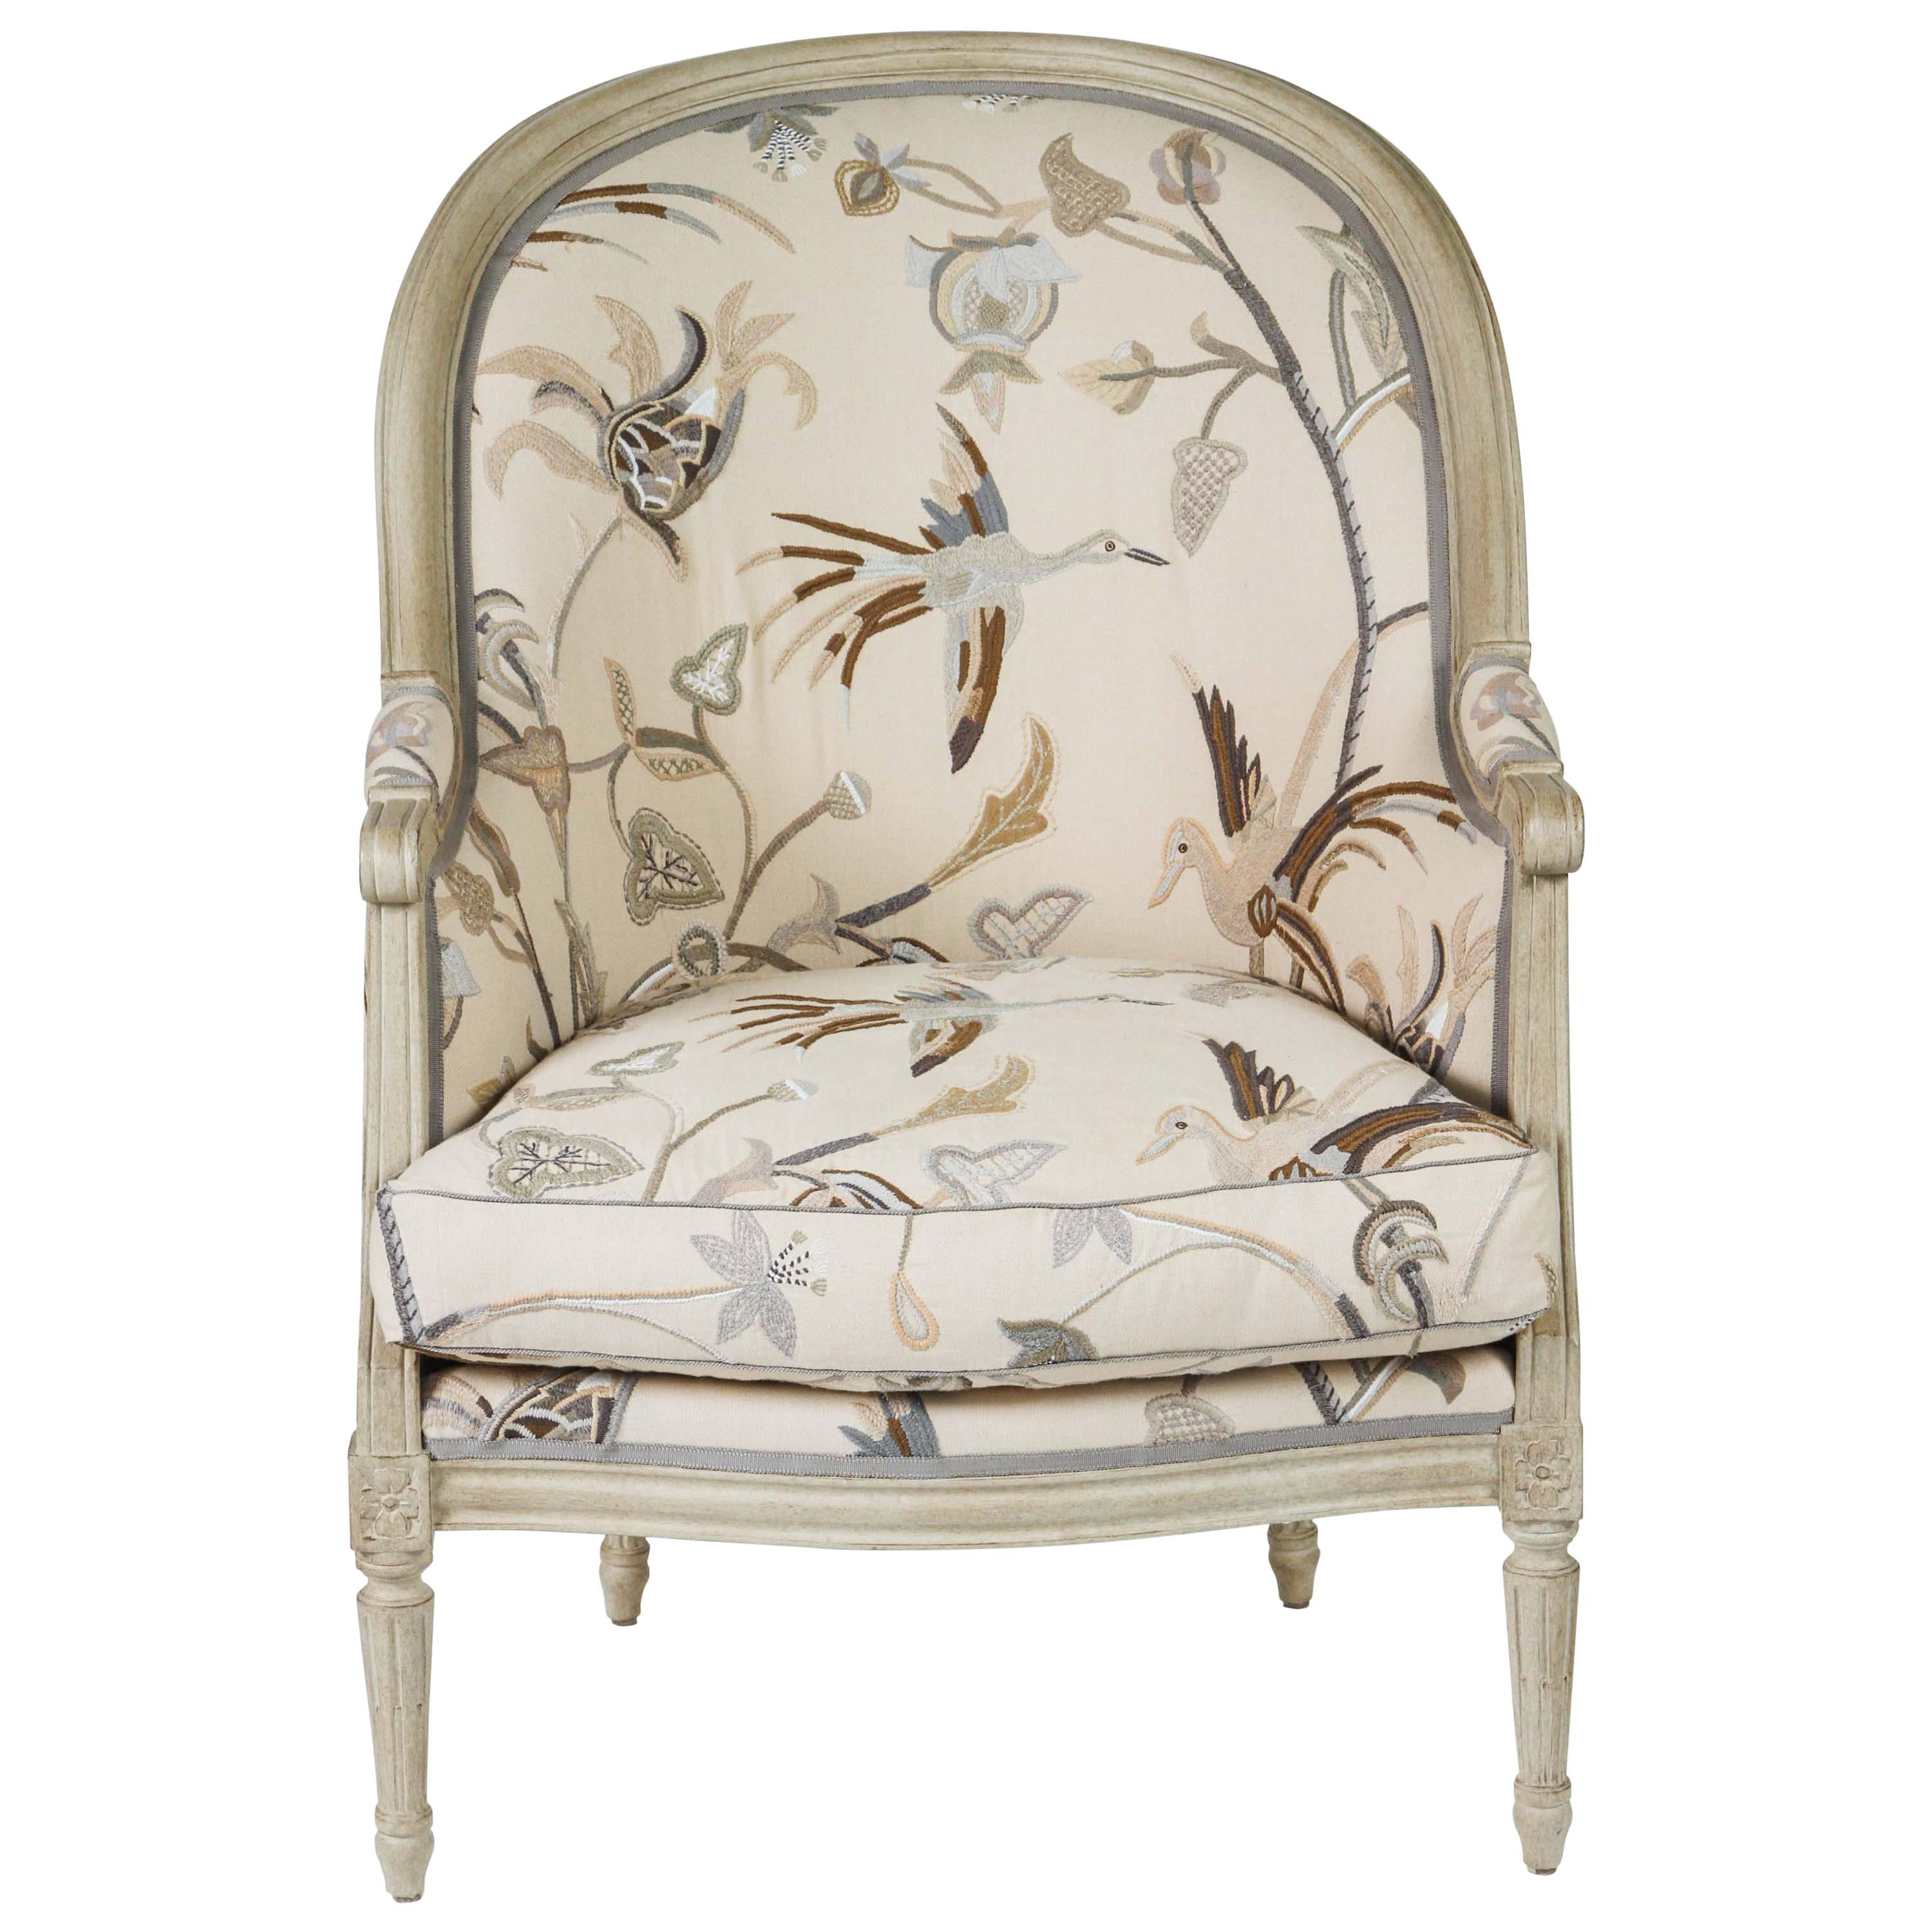 Hollyhock "Mimi" Chair Inspired by a 19th Century Bergere For Sale